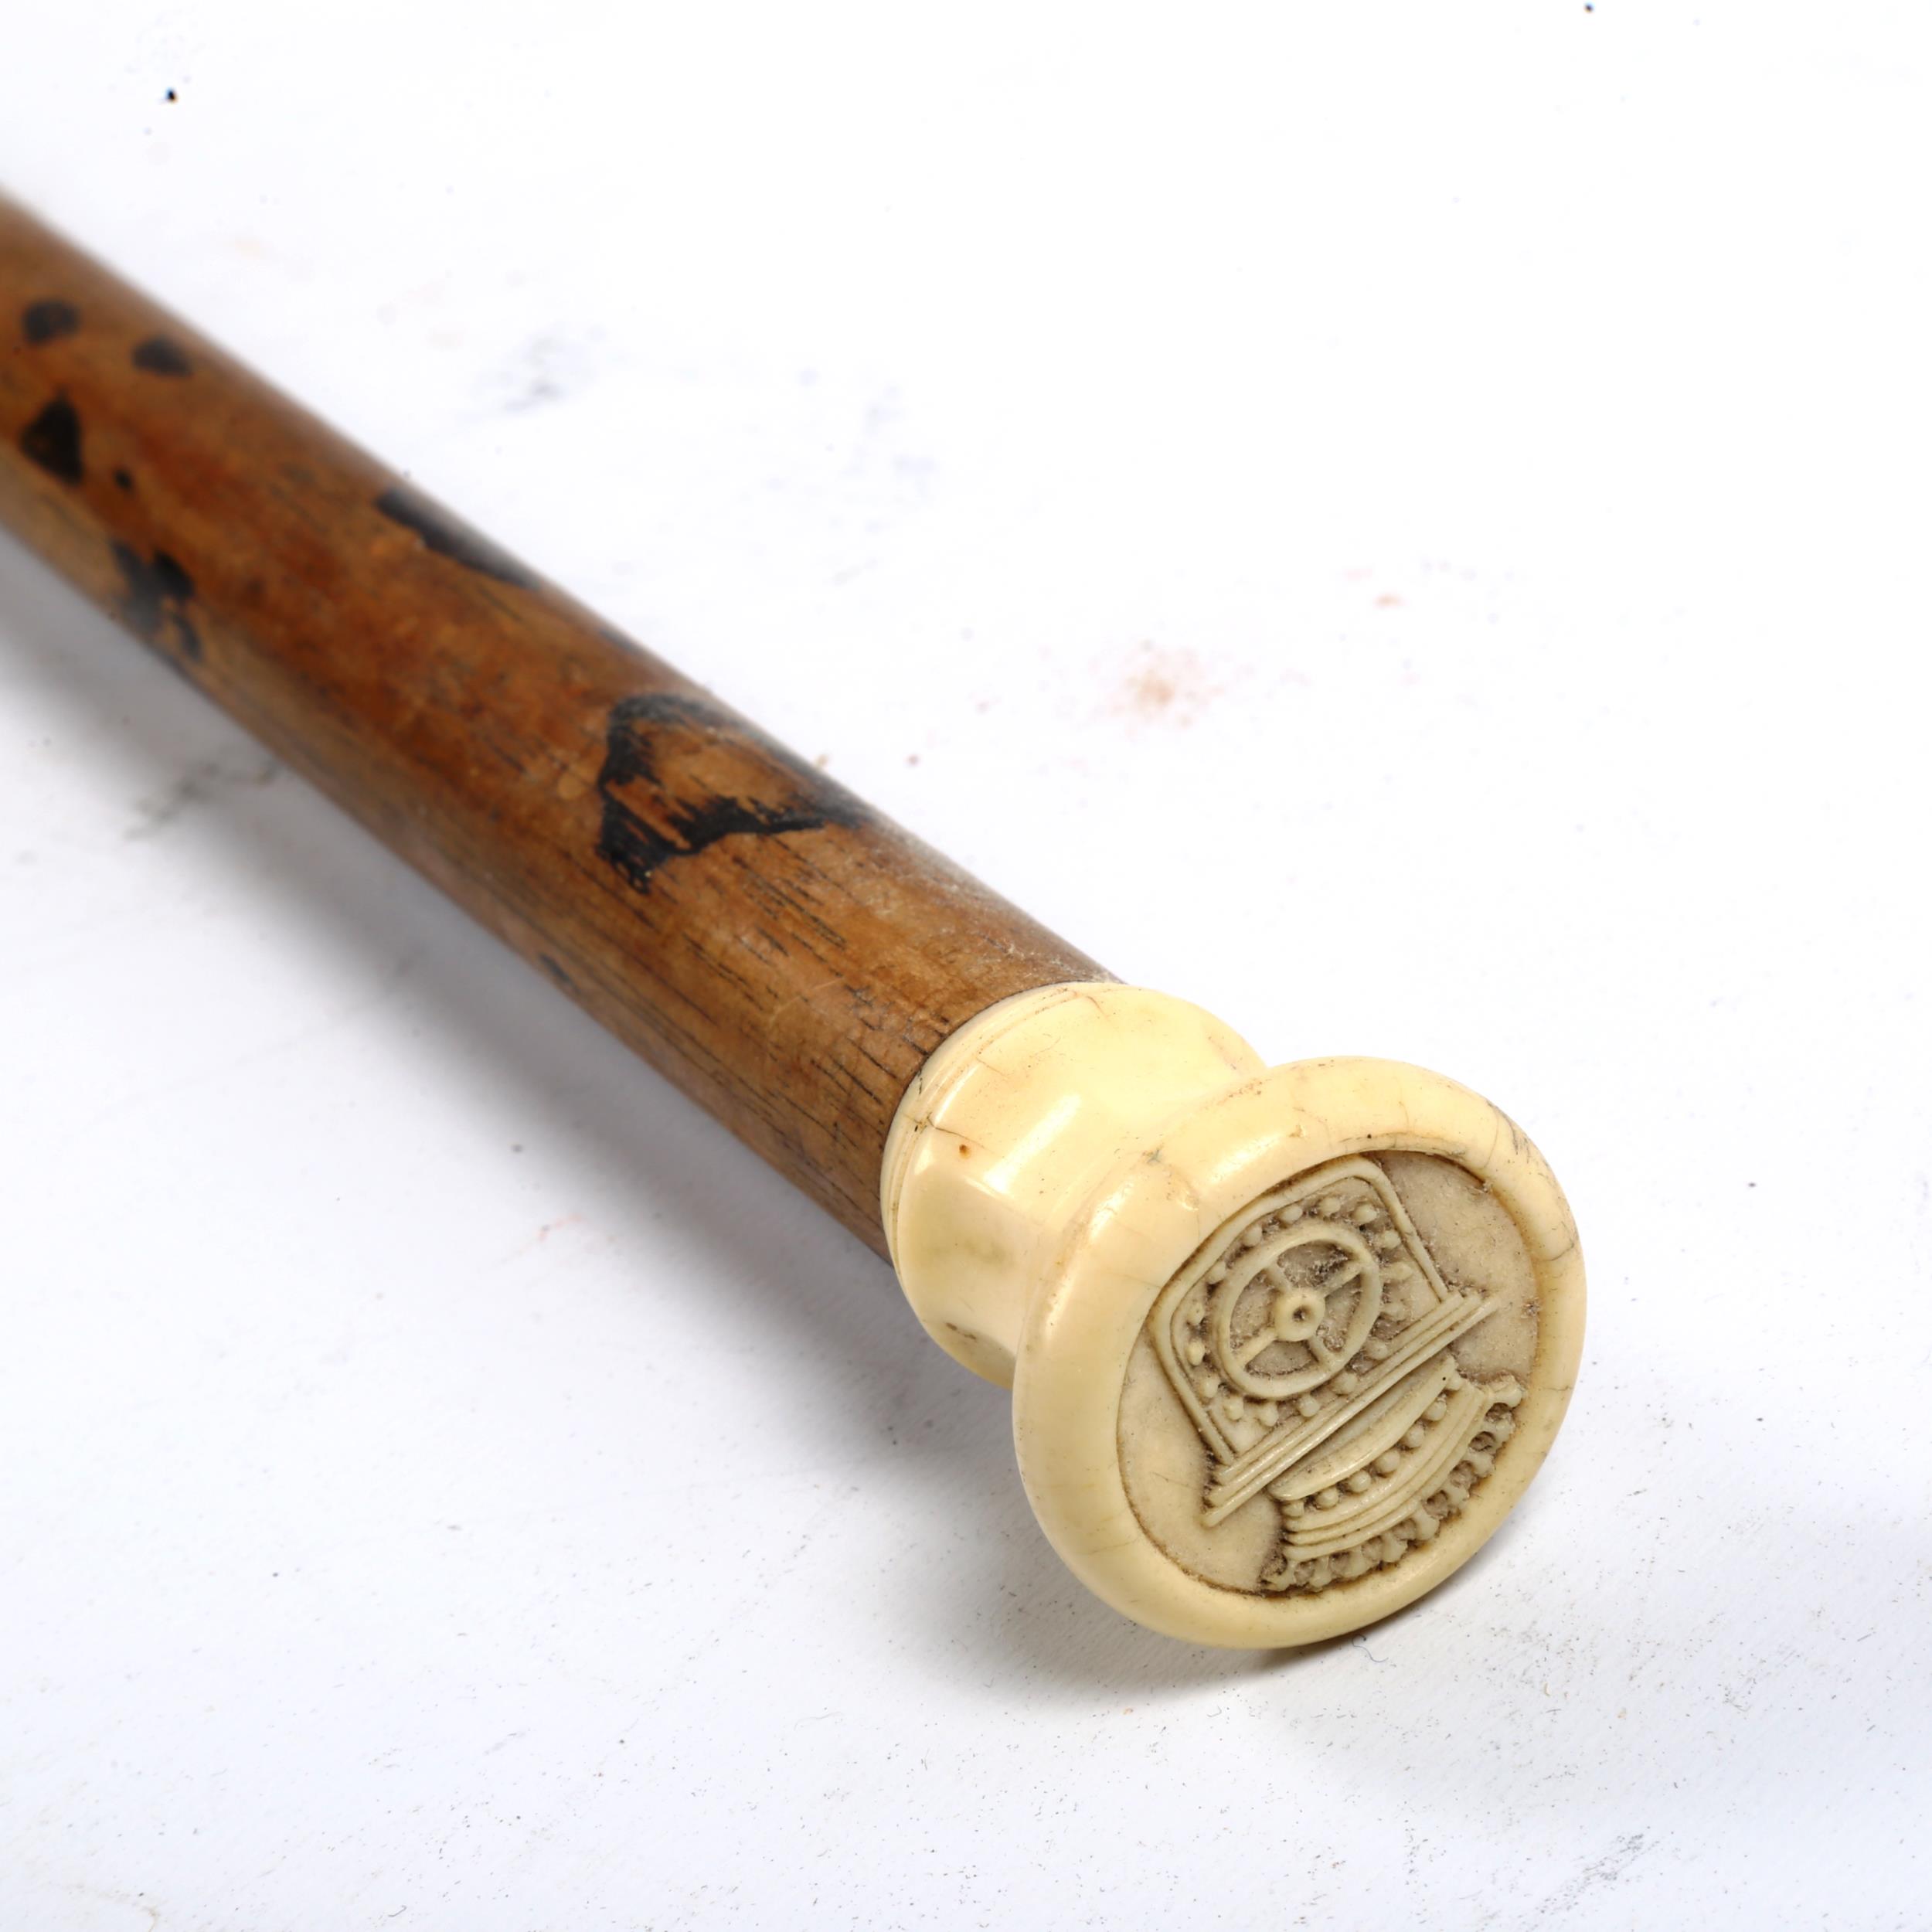 An 18th/19th century ivory-handled walking cane, with seal top - Image 5 of 5